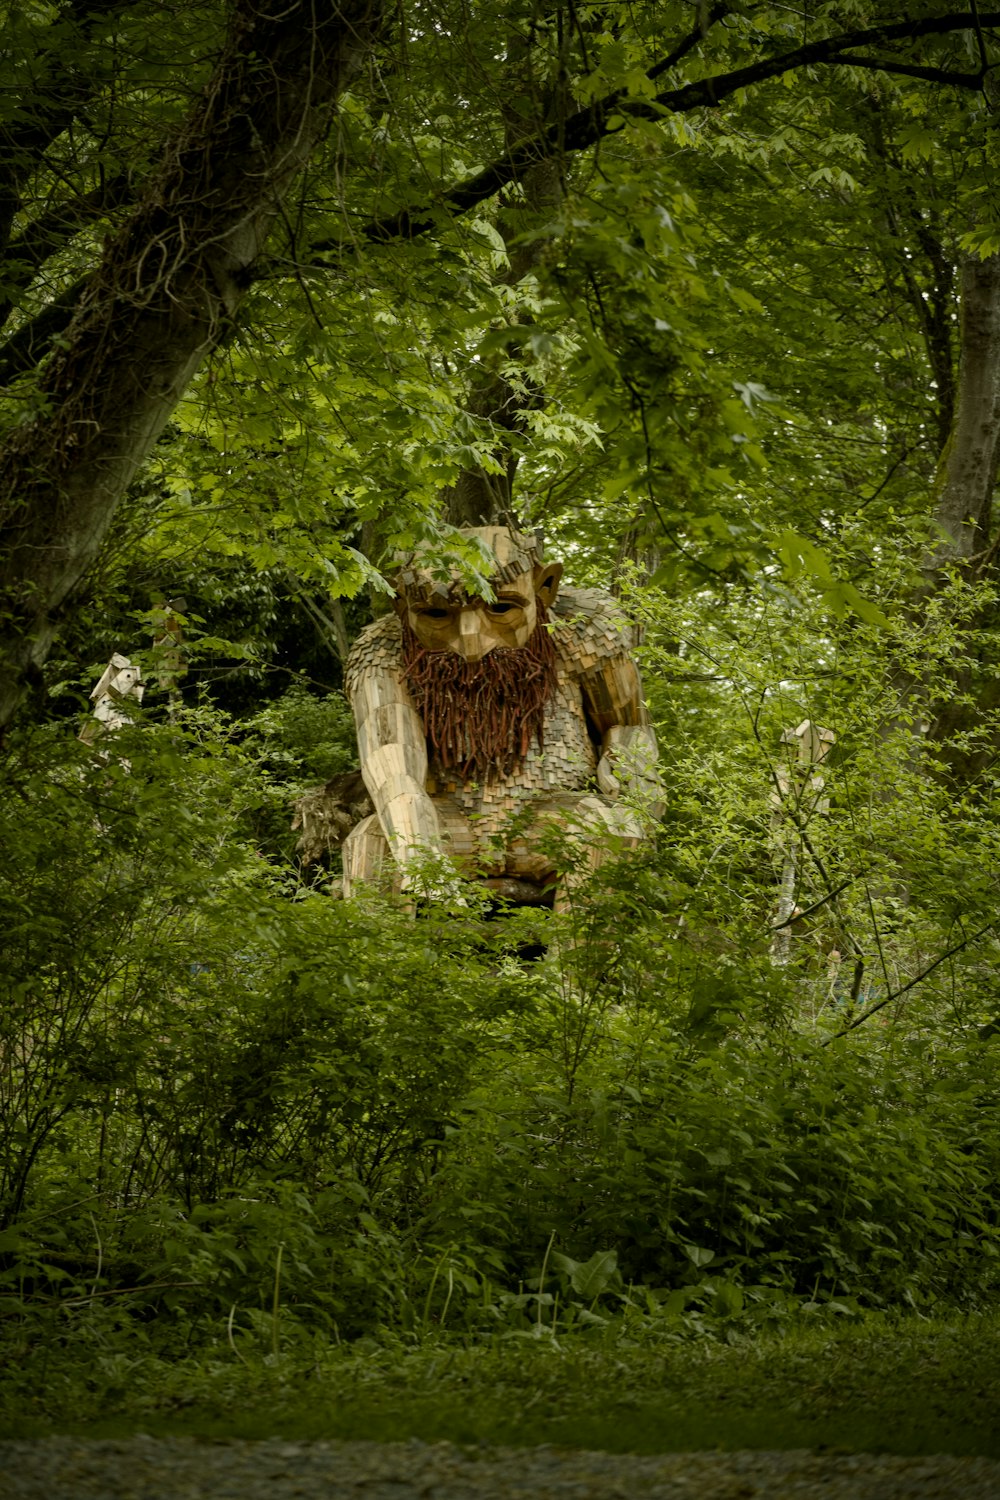 a statue in the middle of a lush green forest